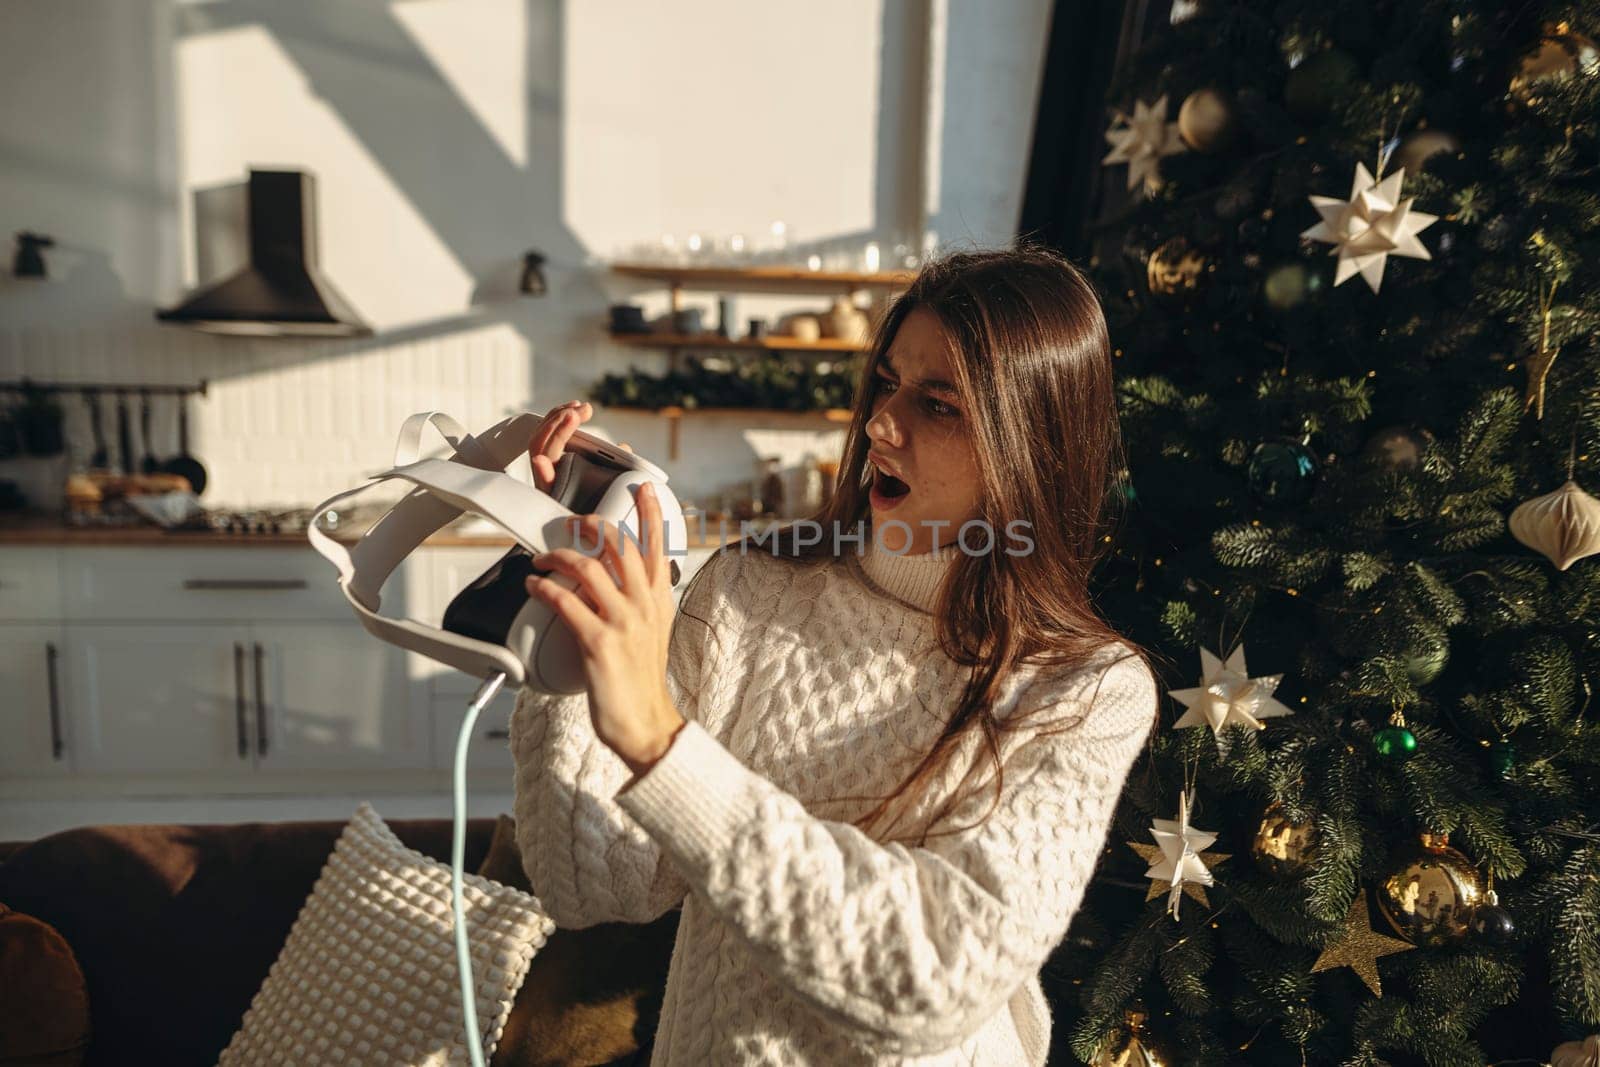 A spirited young woman unwrapped a virtual reality headset as a Christmas present. High quality photo